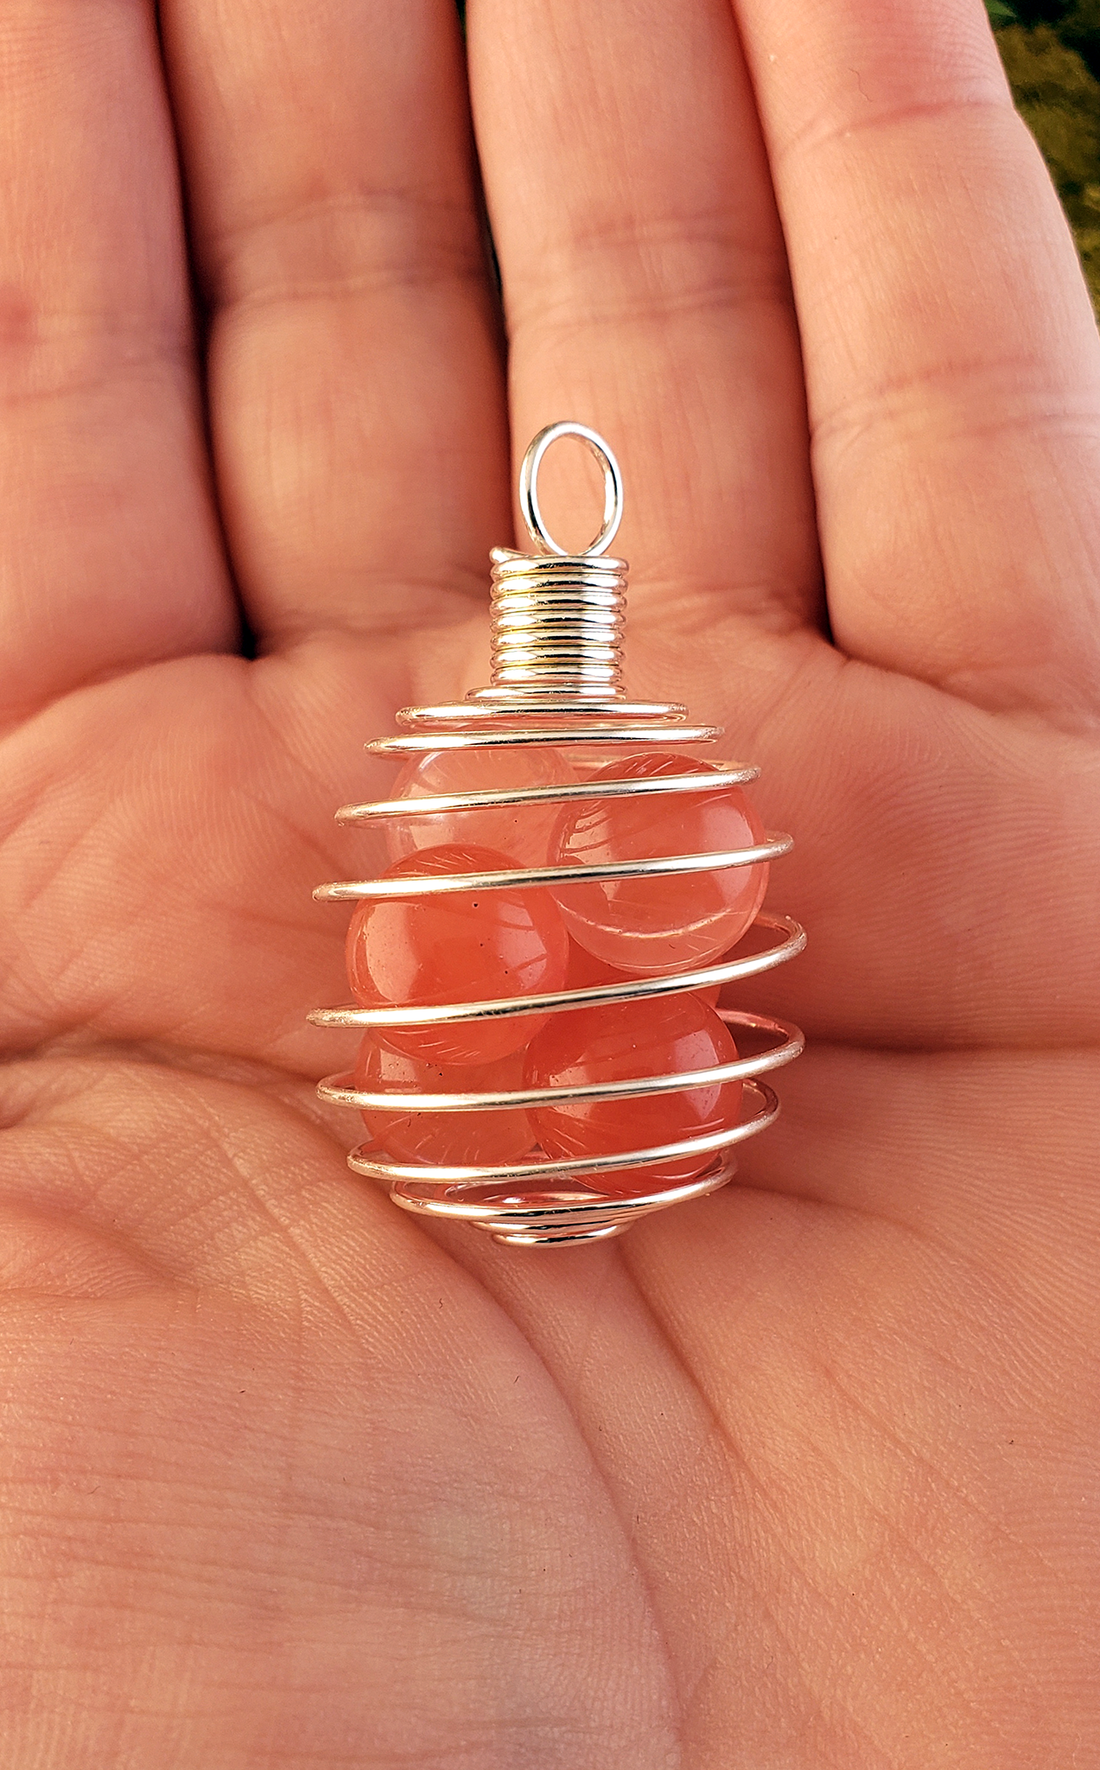 Silver-Colored Metal Spiral Cage Ornament Pendant - Perfect for Holding Gemstones or Orbs! - With Strawberry Obsidian 10mm Orbs on Display